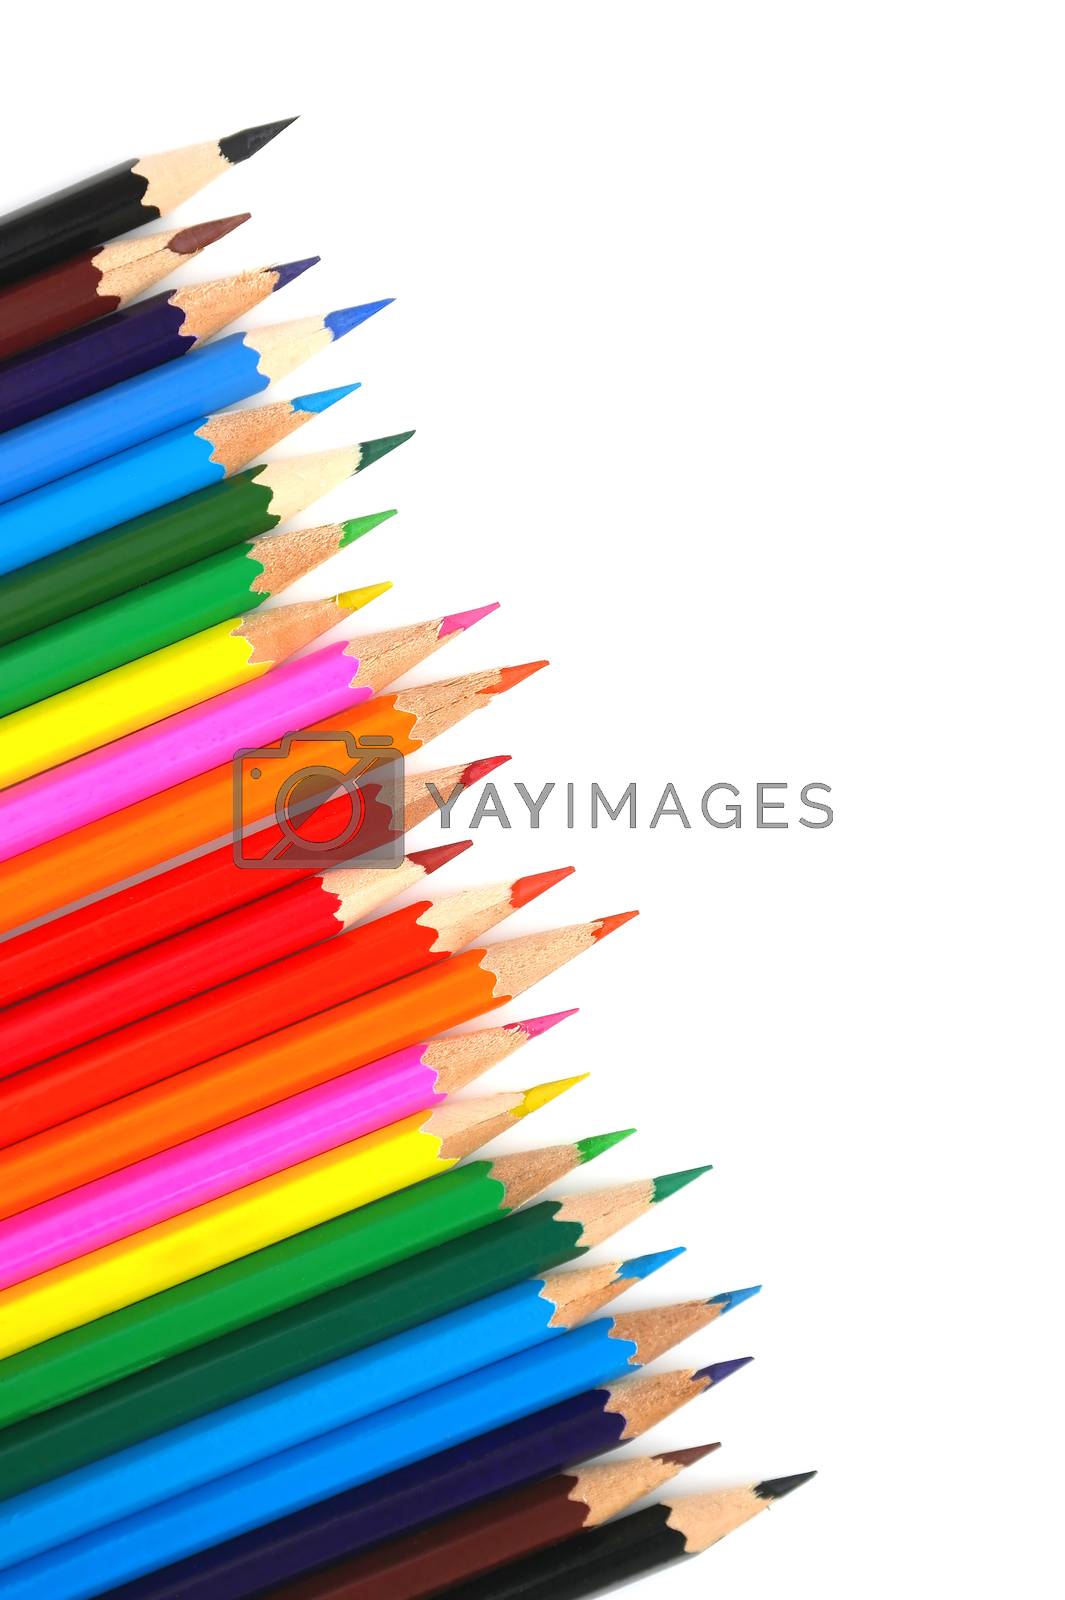 Royalty free image of Abstract background, color pencils by sergpet